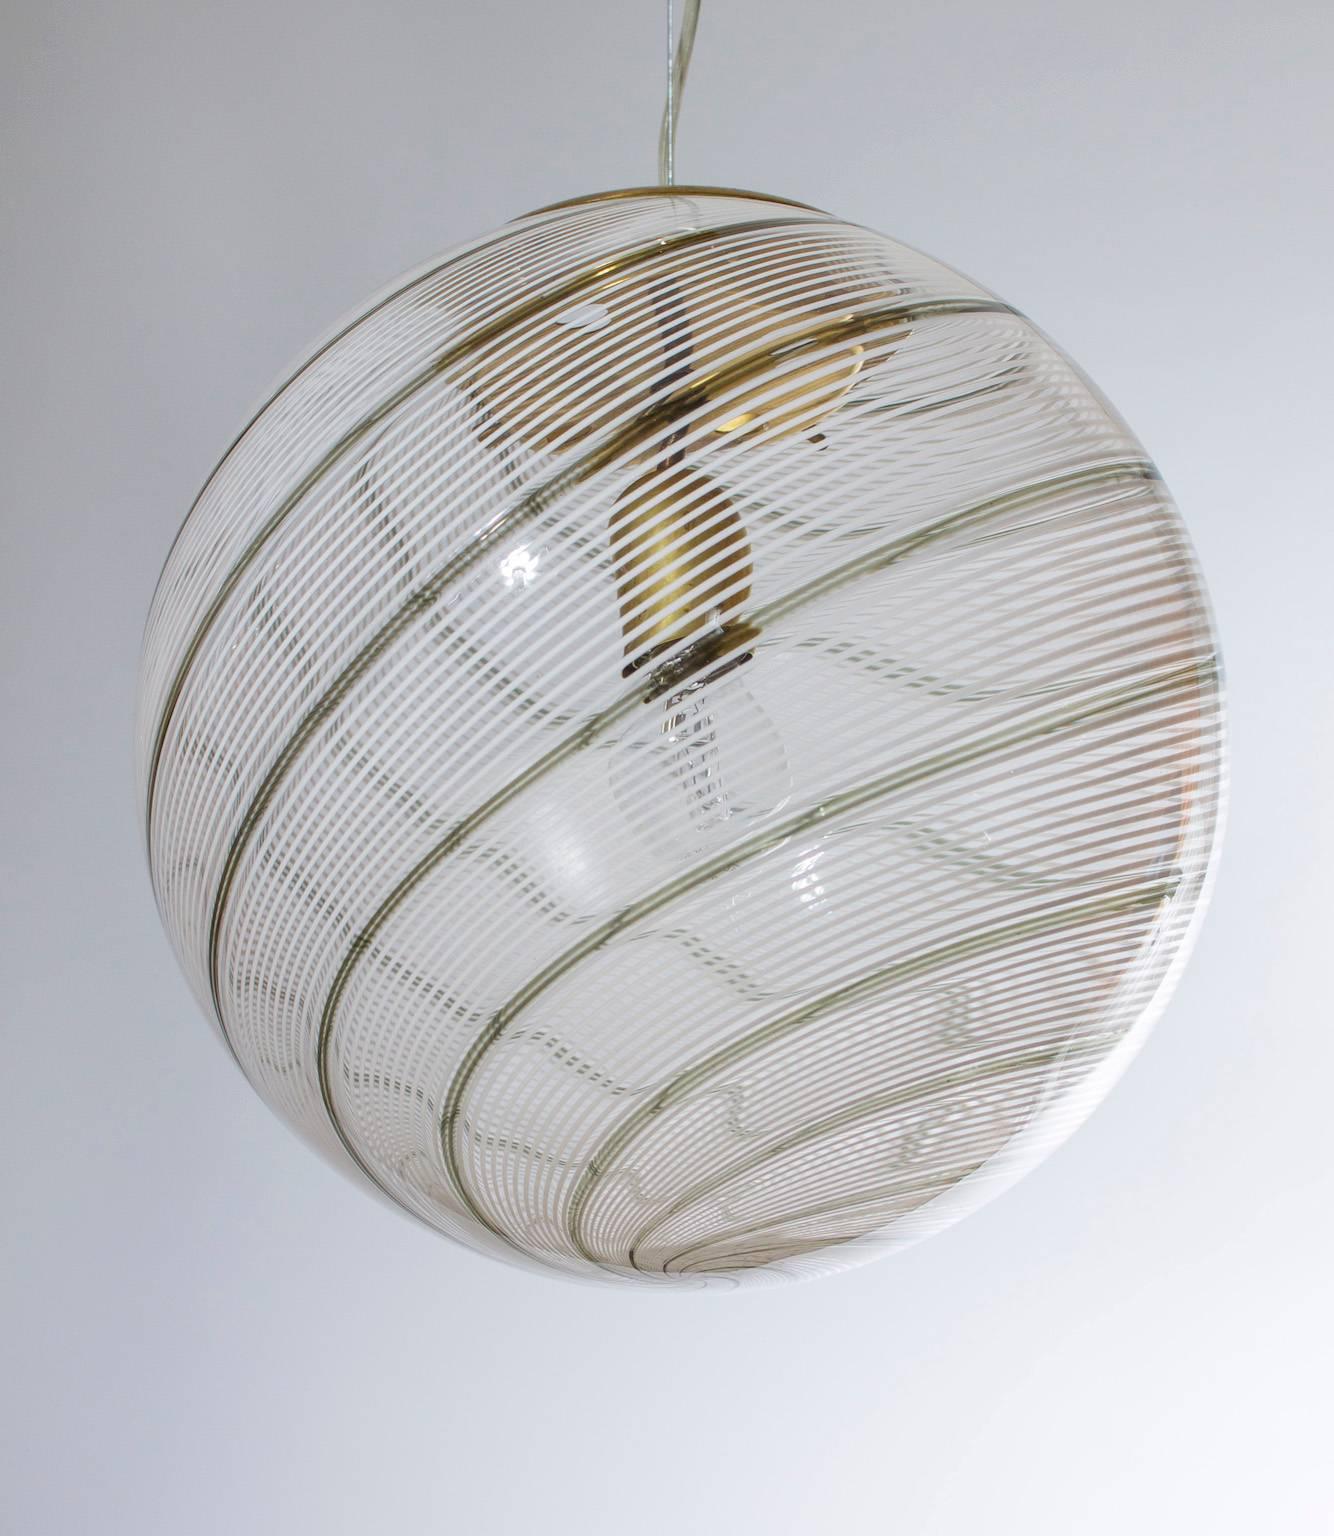 Art Deco Vintage Murano Fixture: Clear Glass Sphere with Accented Stripes 1960s Italy